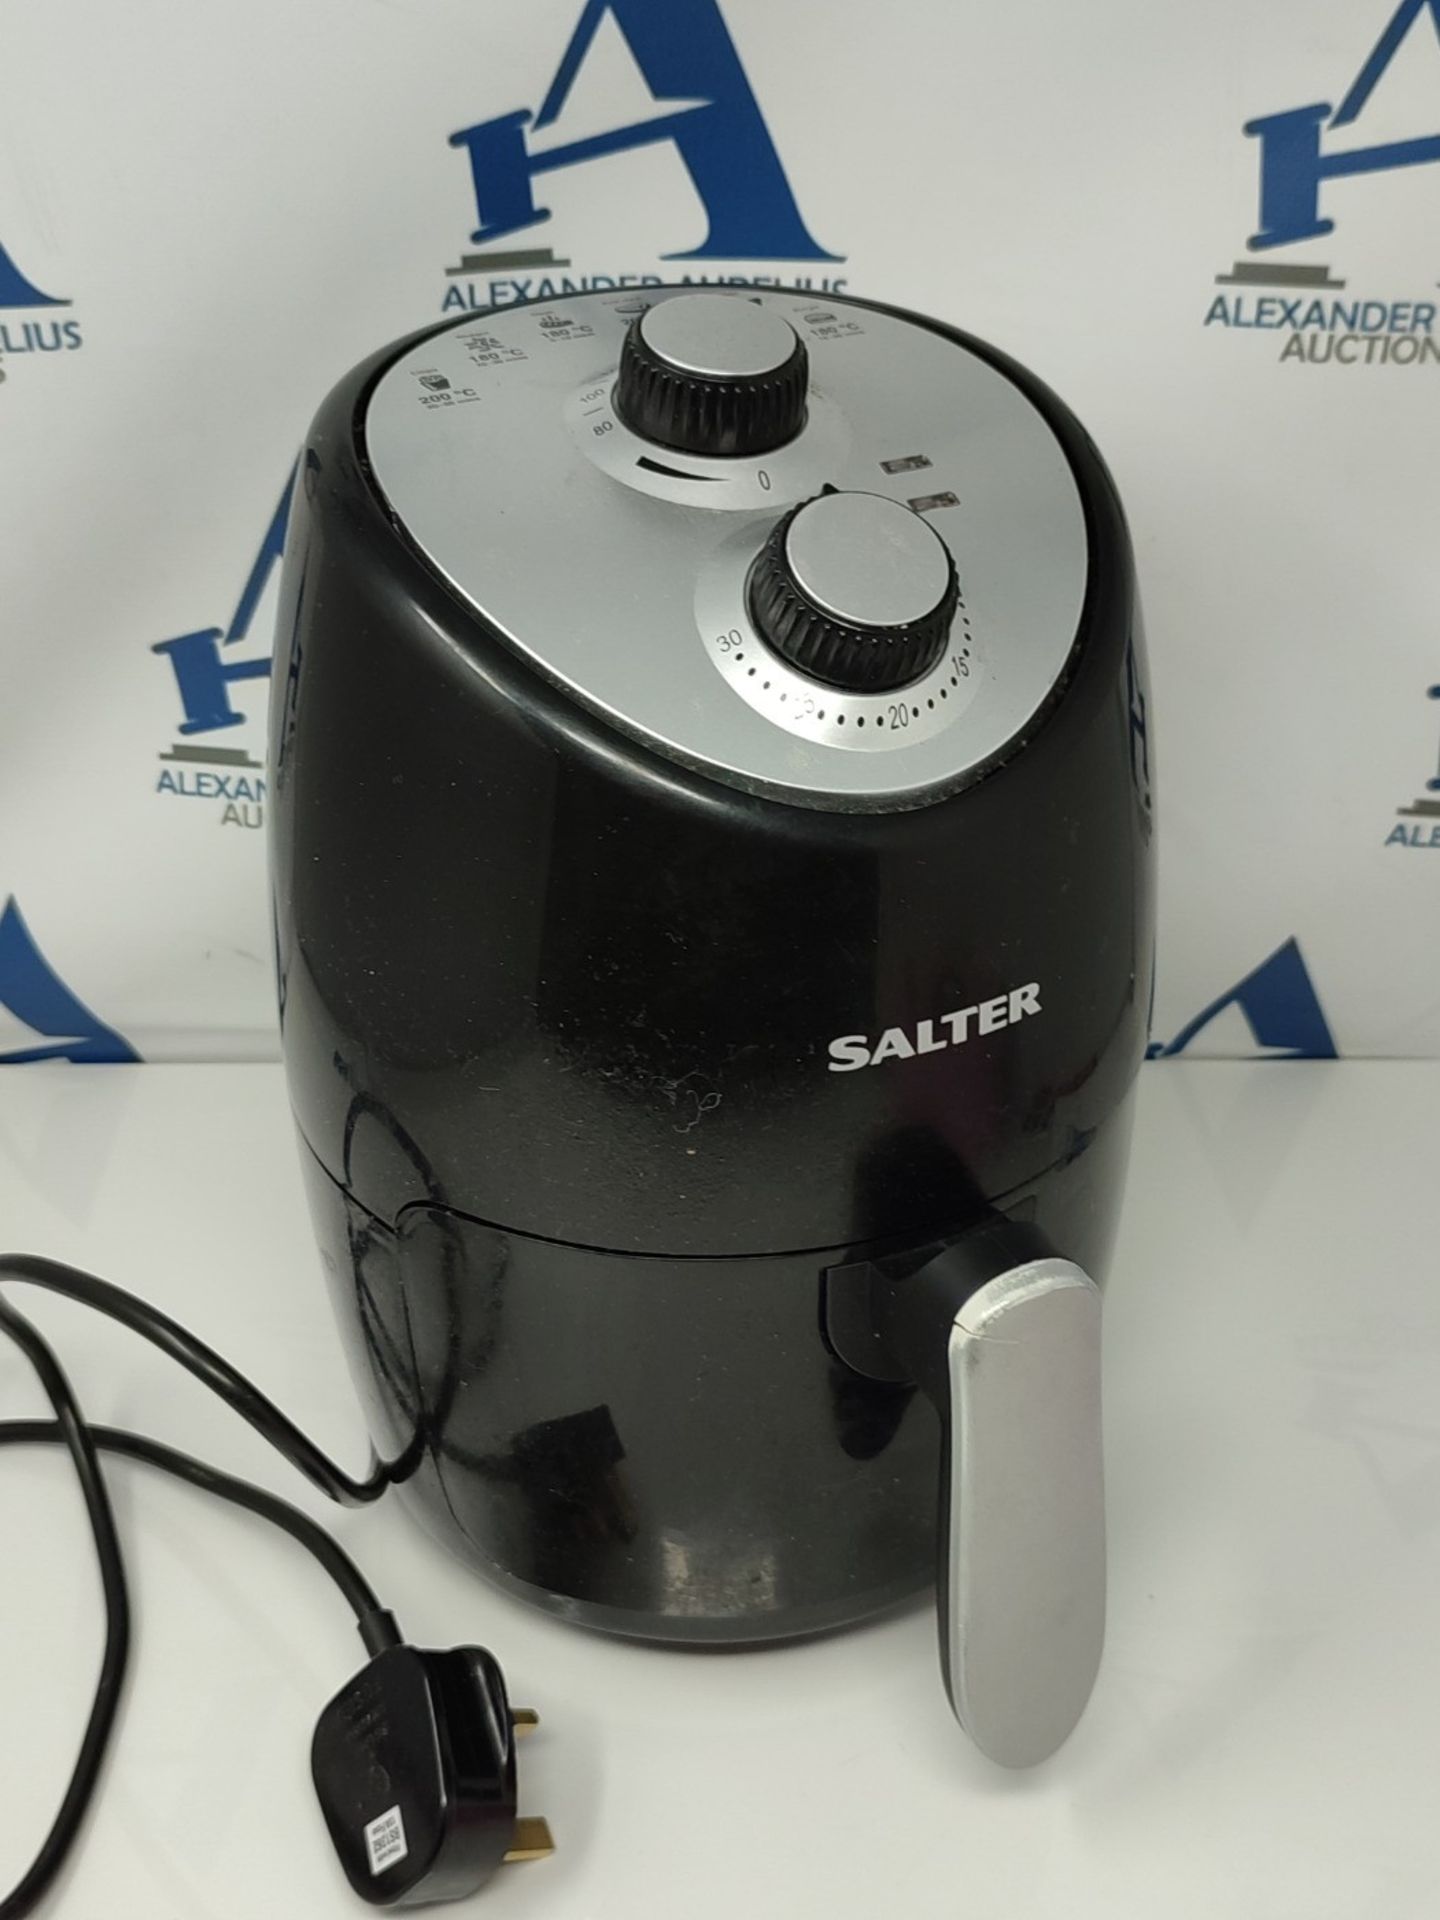 Salter EK2817 2L Compact Air Fryer - Hot Air Circulation, Removable Non-Stick Cooking - Image 3 of 3